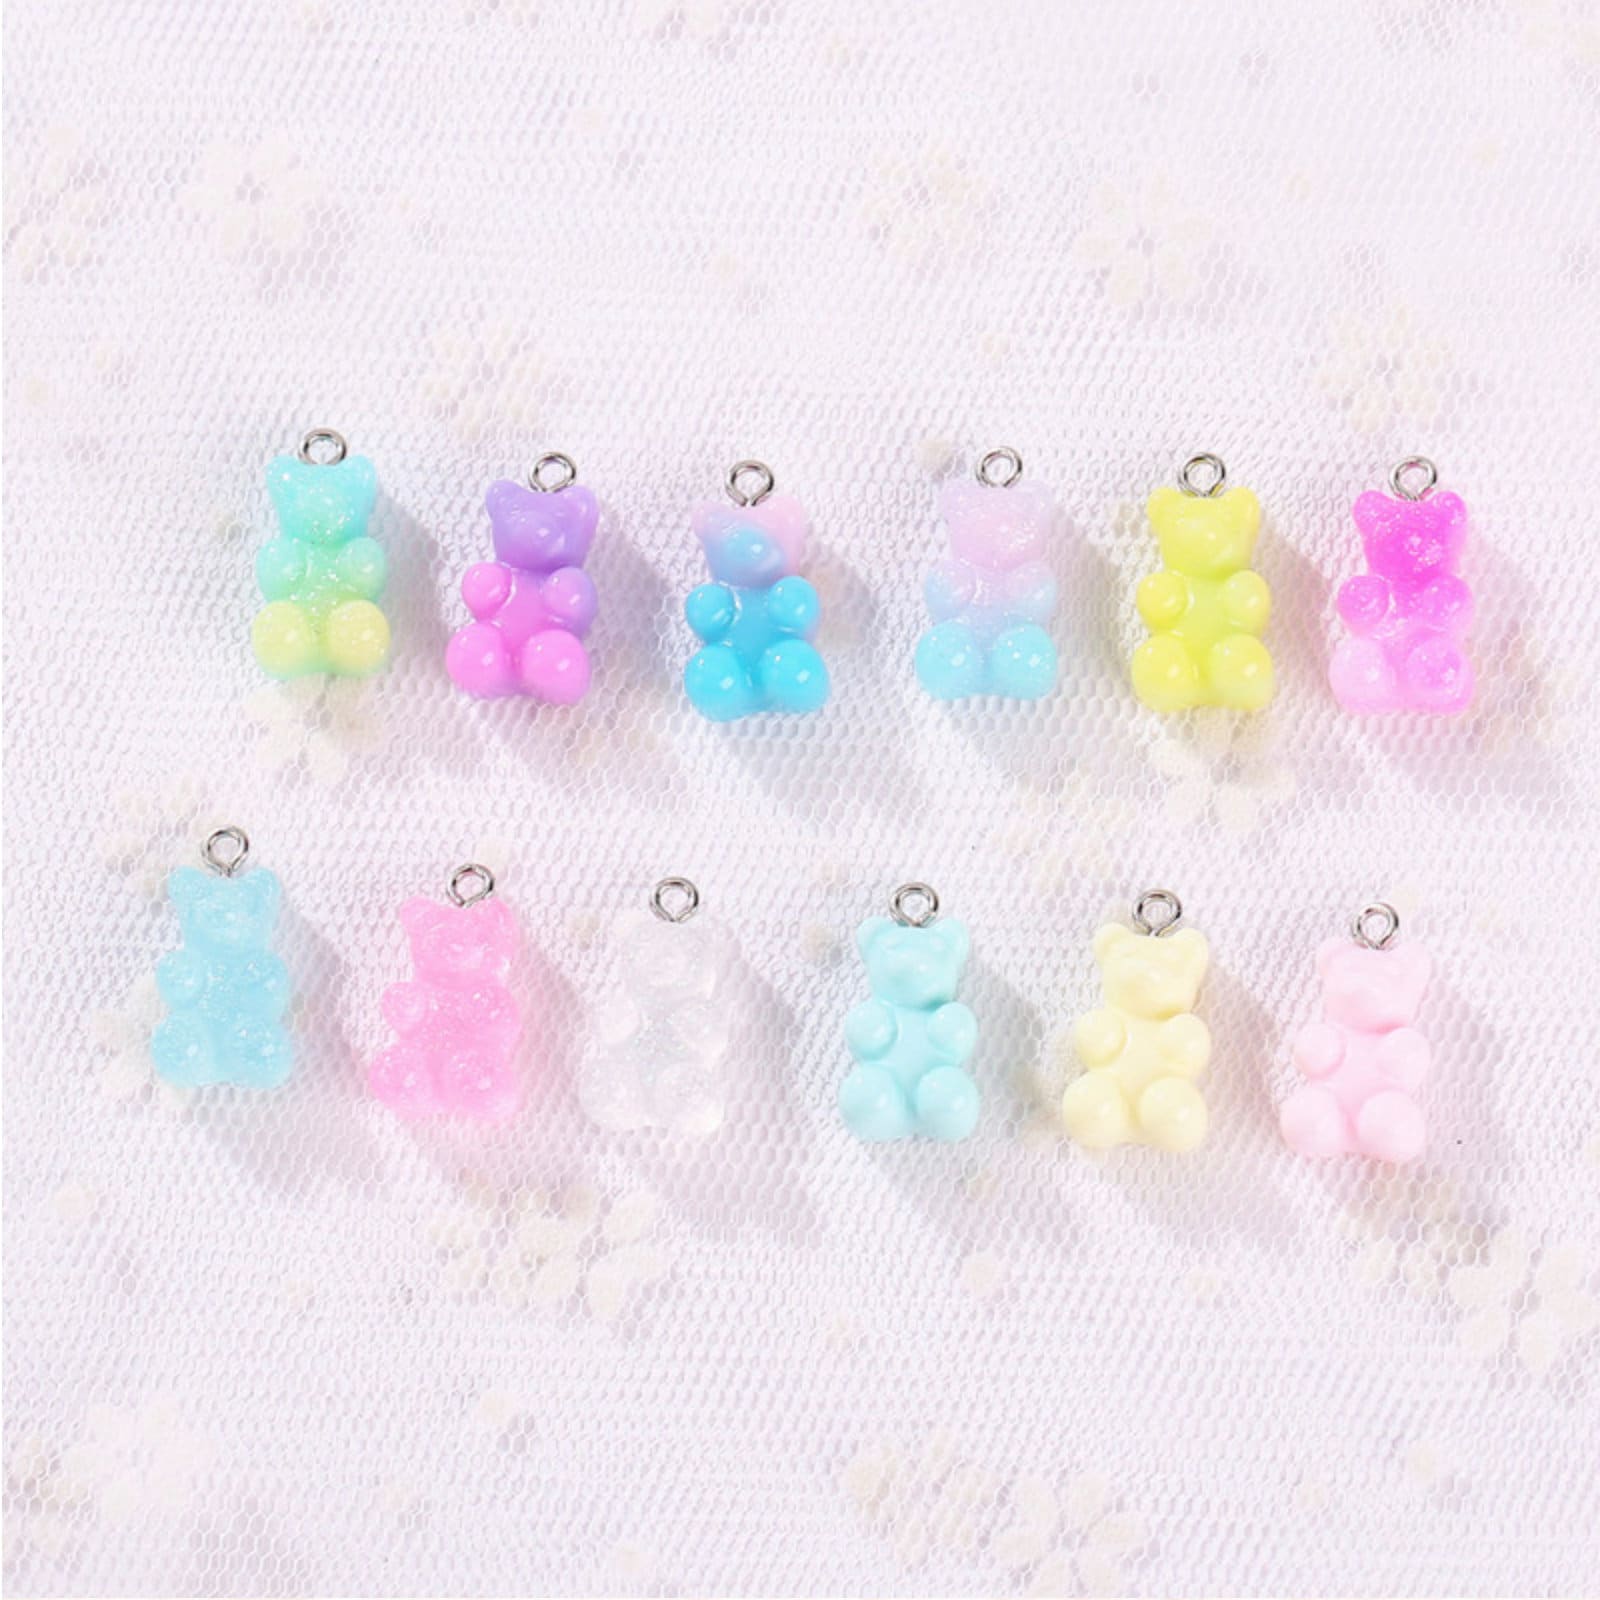 Cute Solid Colored Pastel Gummy Bear Charms with eyepins (10mm x 16mm)